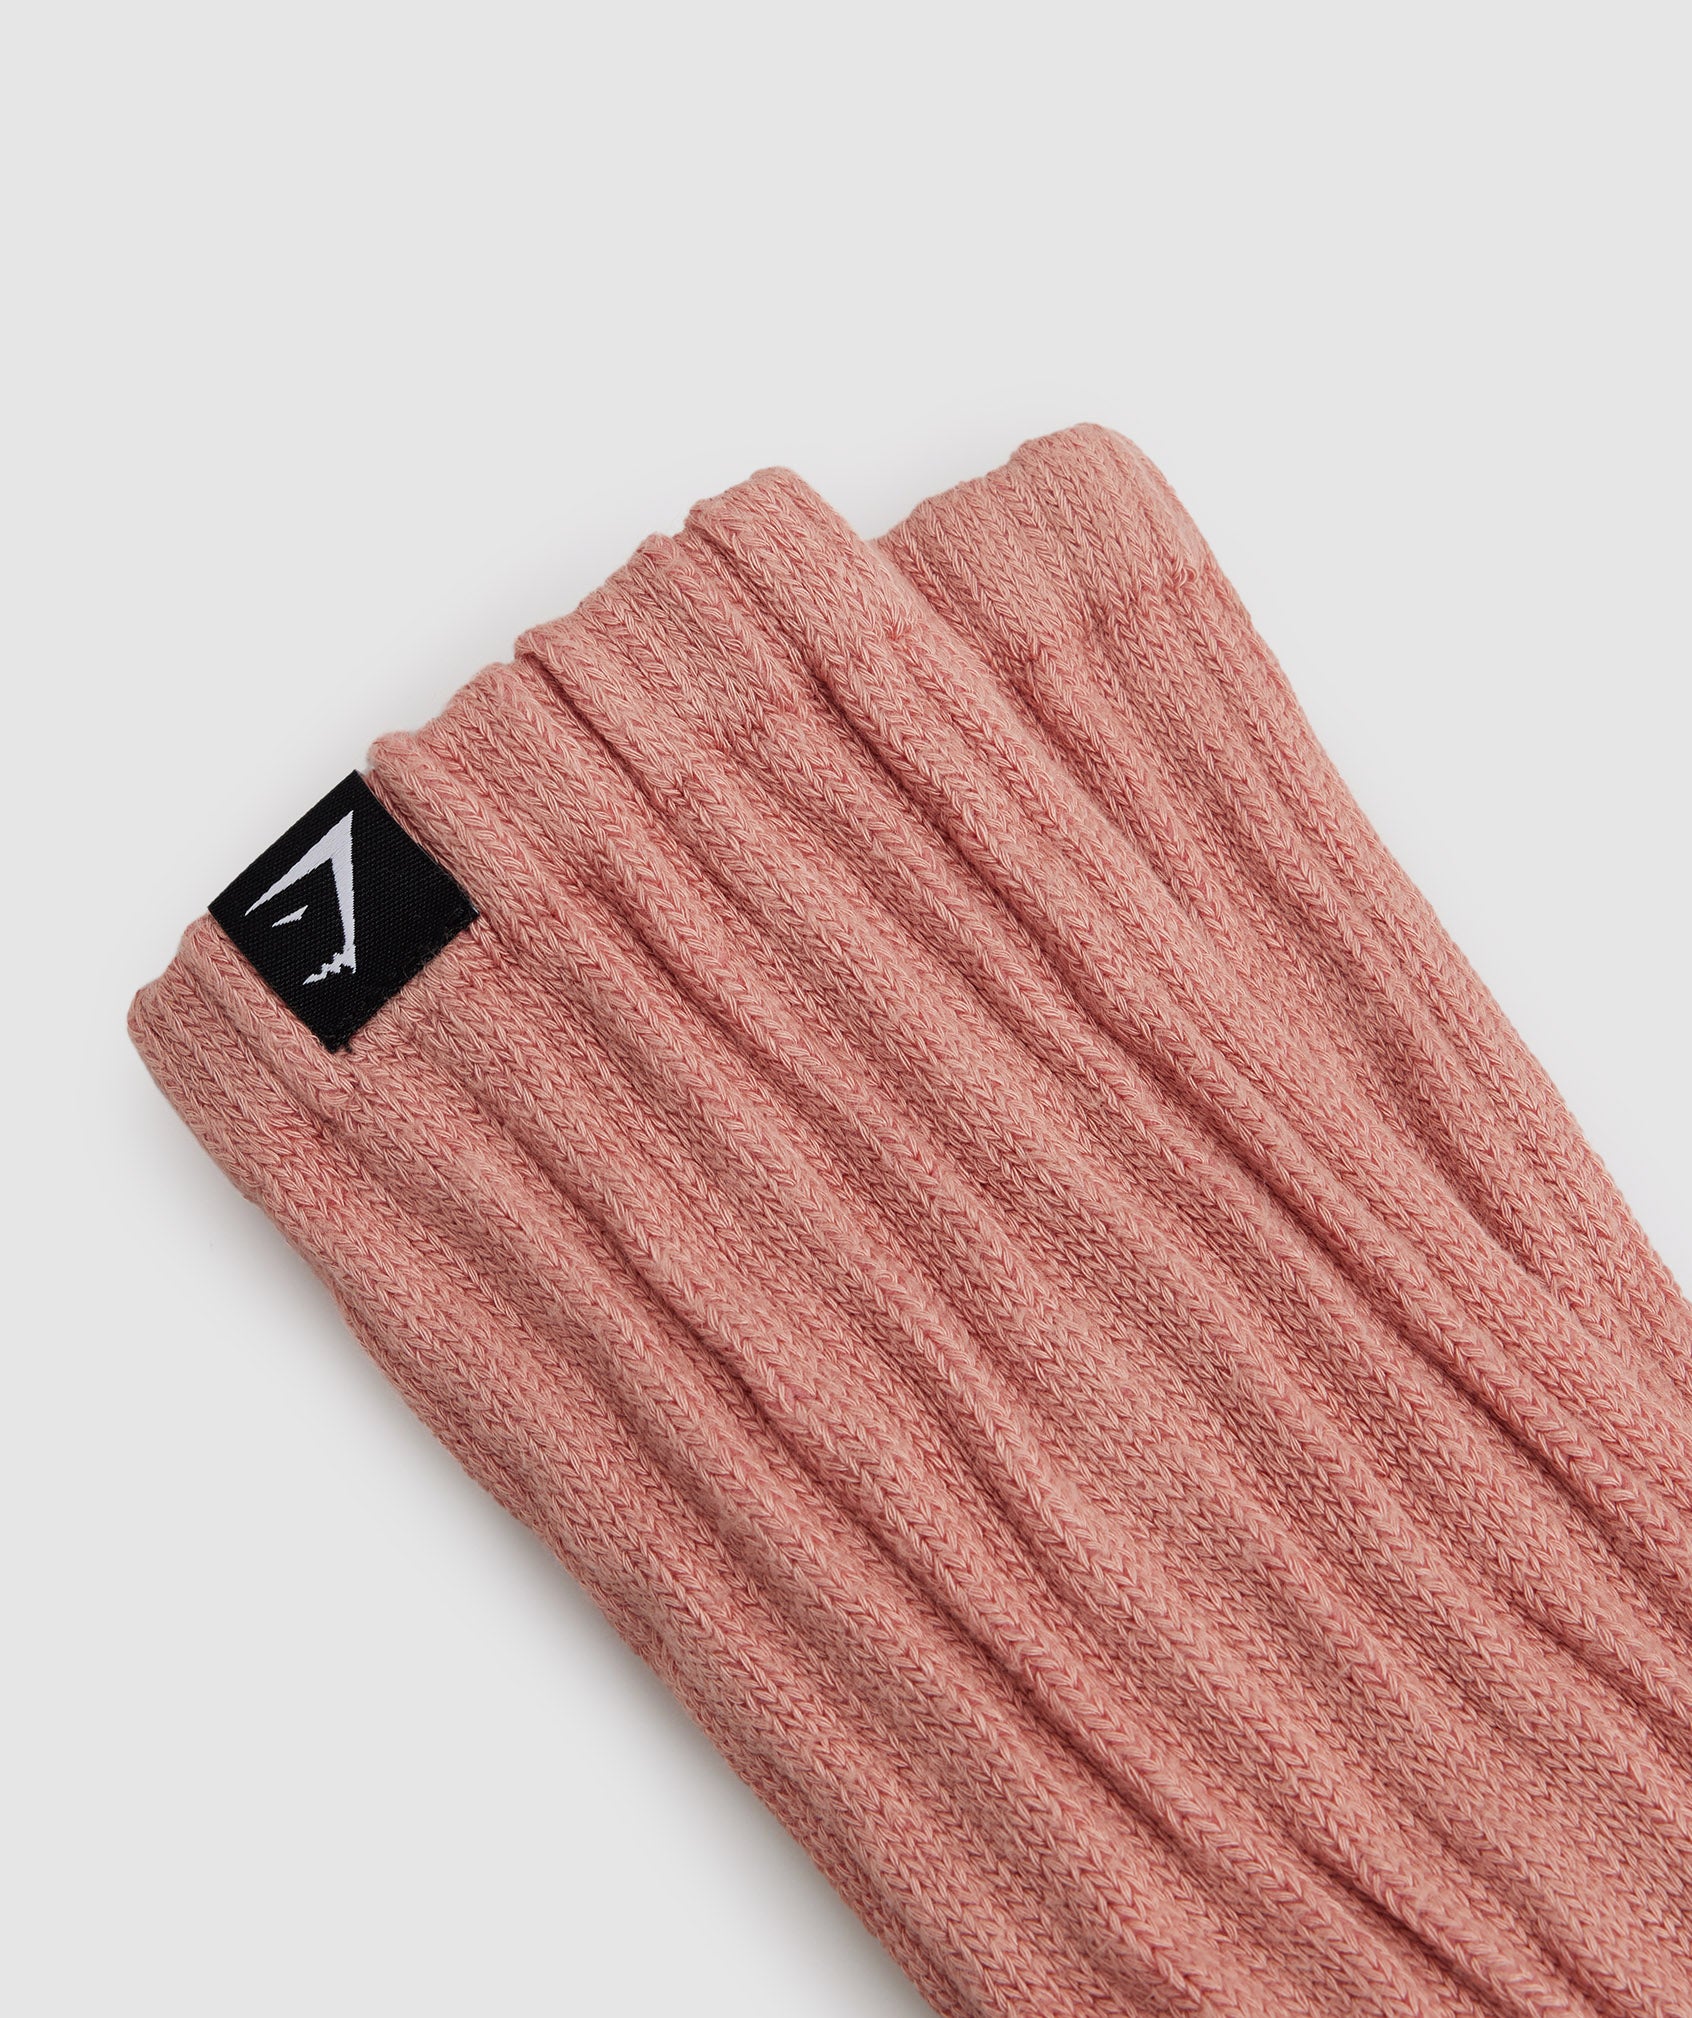 Comfy Rest Day Socks in Hazy Pink - view 2